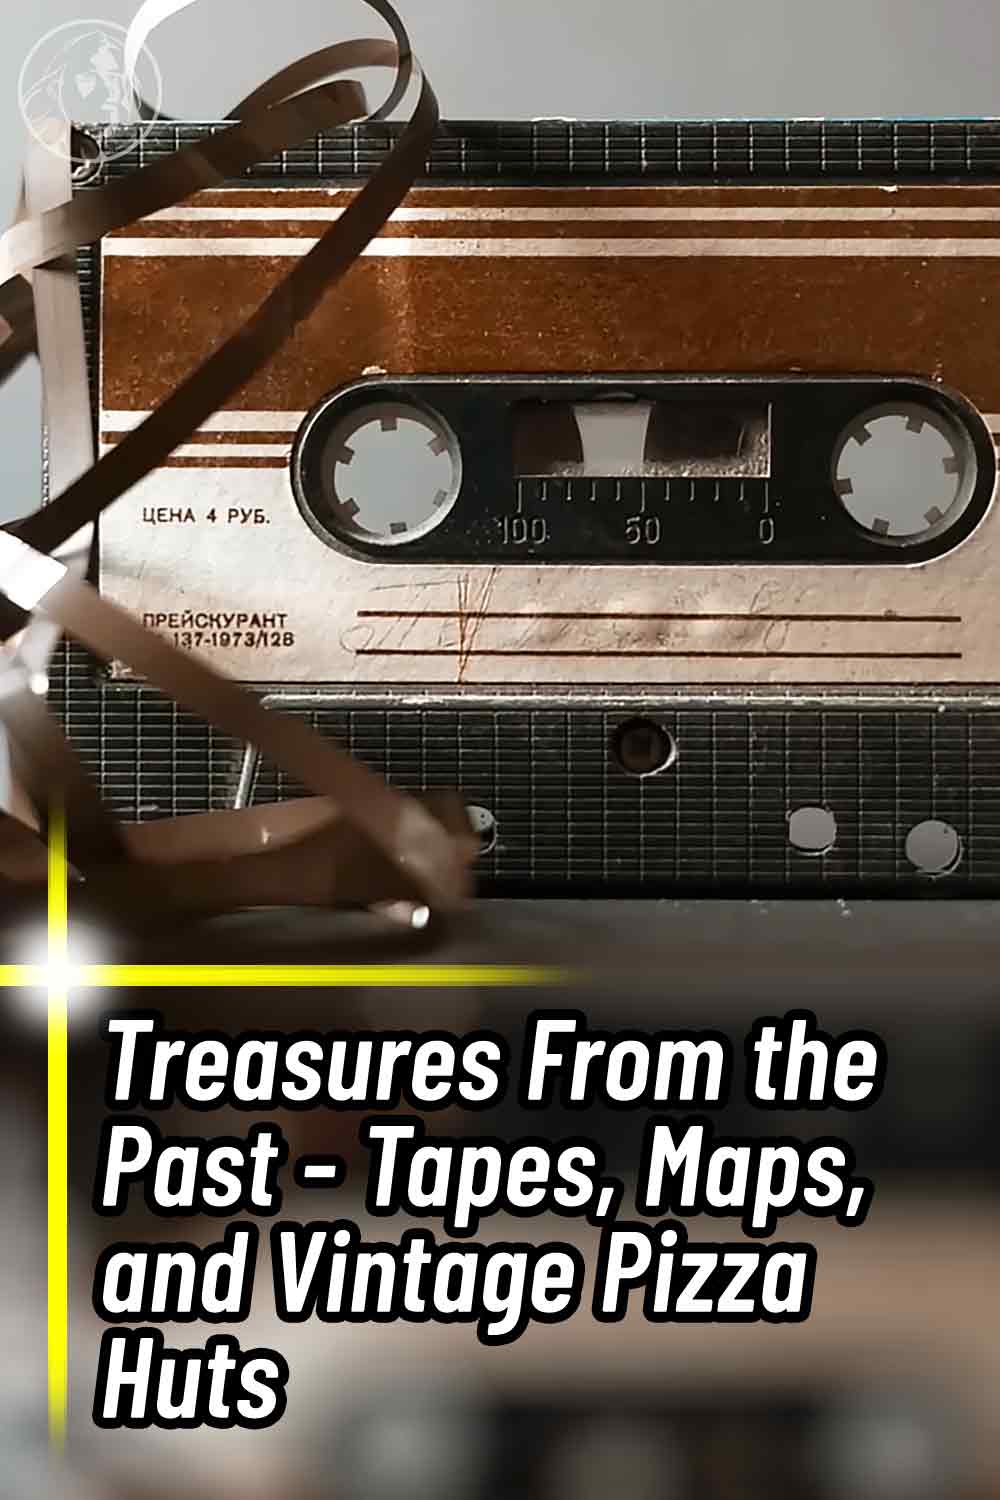 Treasures From the Past - Tapes, Maps, and Vintage Pizza Huts